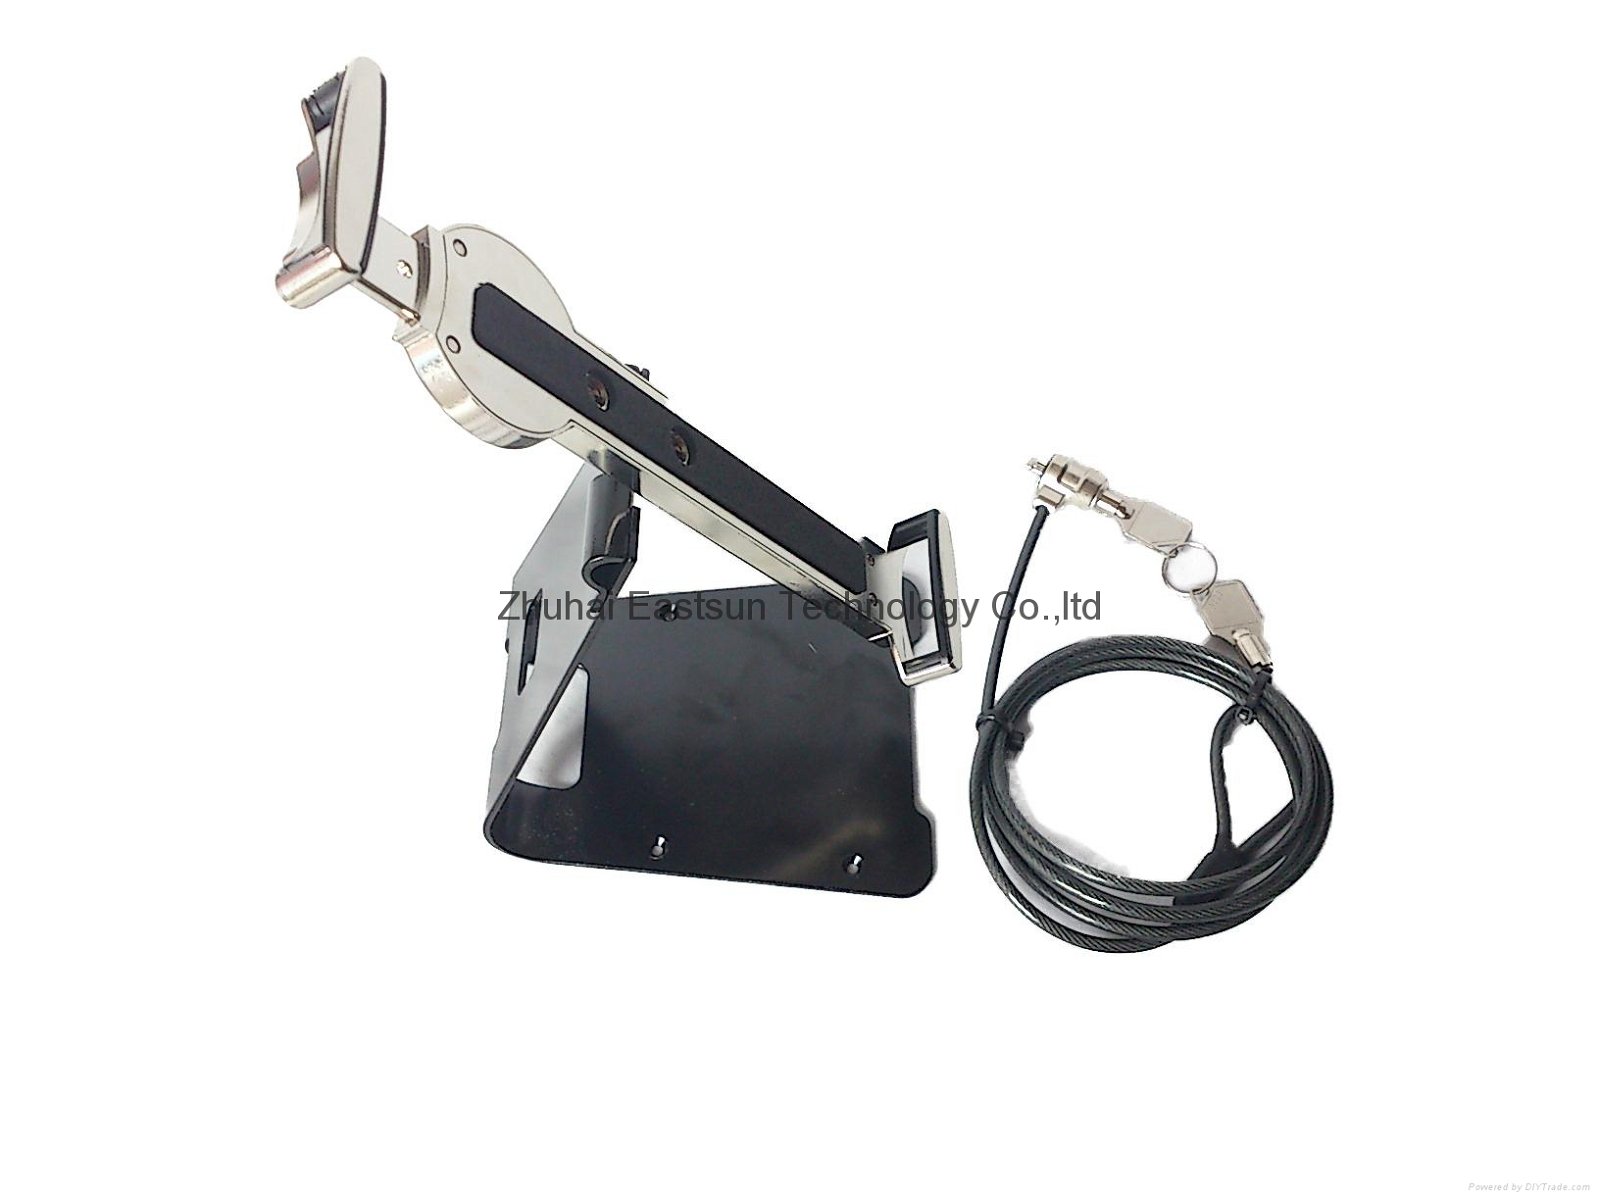 Adjustable Anti-theft display lock stand fit to 7'' to 10'' tablet pcs 4